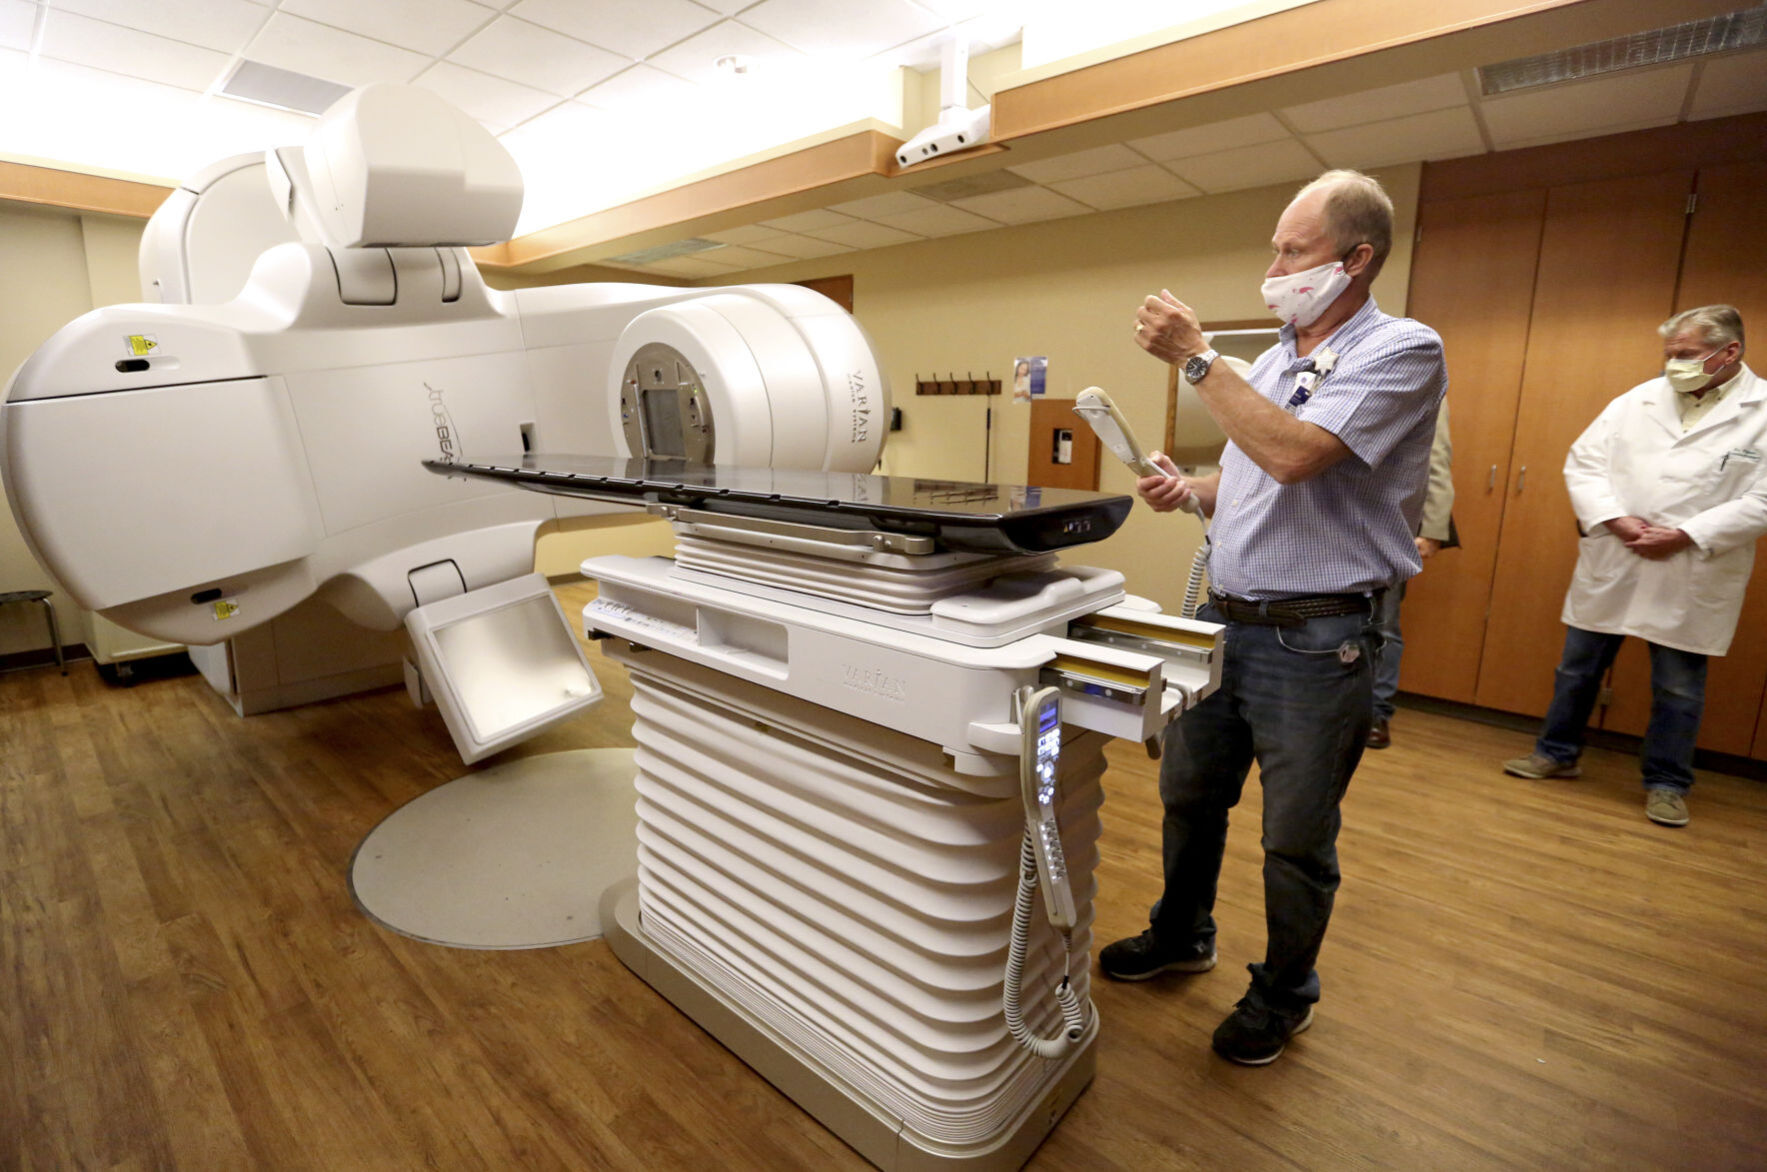 Mike Kelly, manager of oncology at Wendt Regional Cancer Center, discusses the linear accelerator at the new Integrated Cancer Center in Dubuque. PHOTO CREDIT: JESSICA REILLY